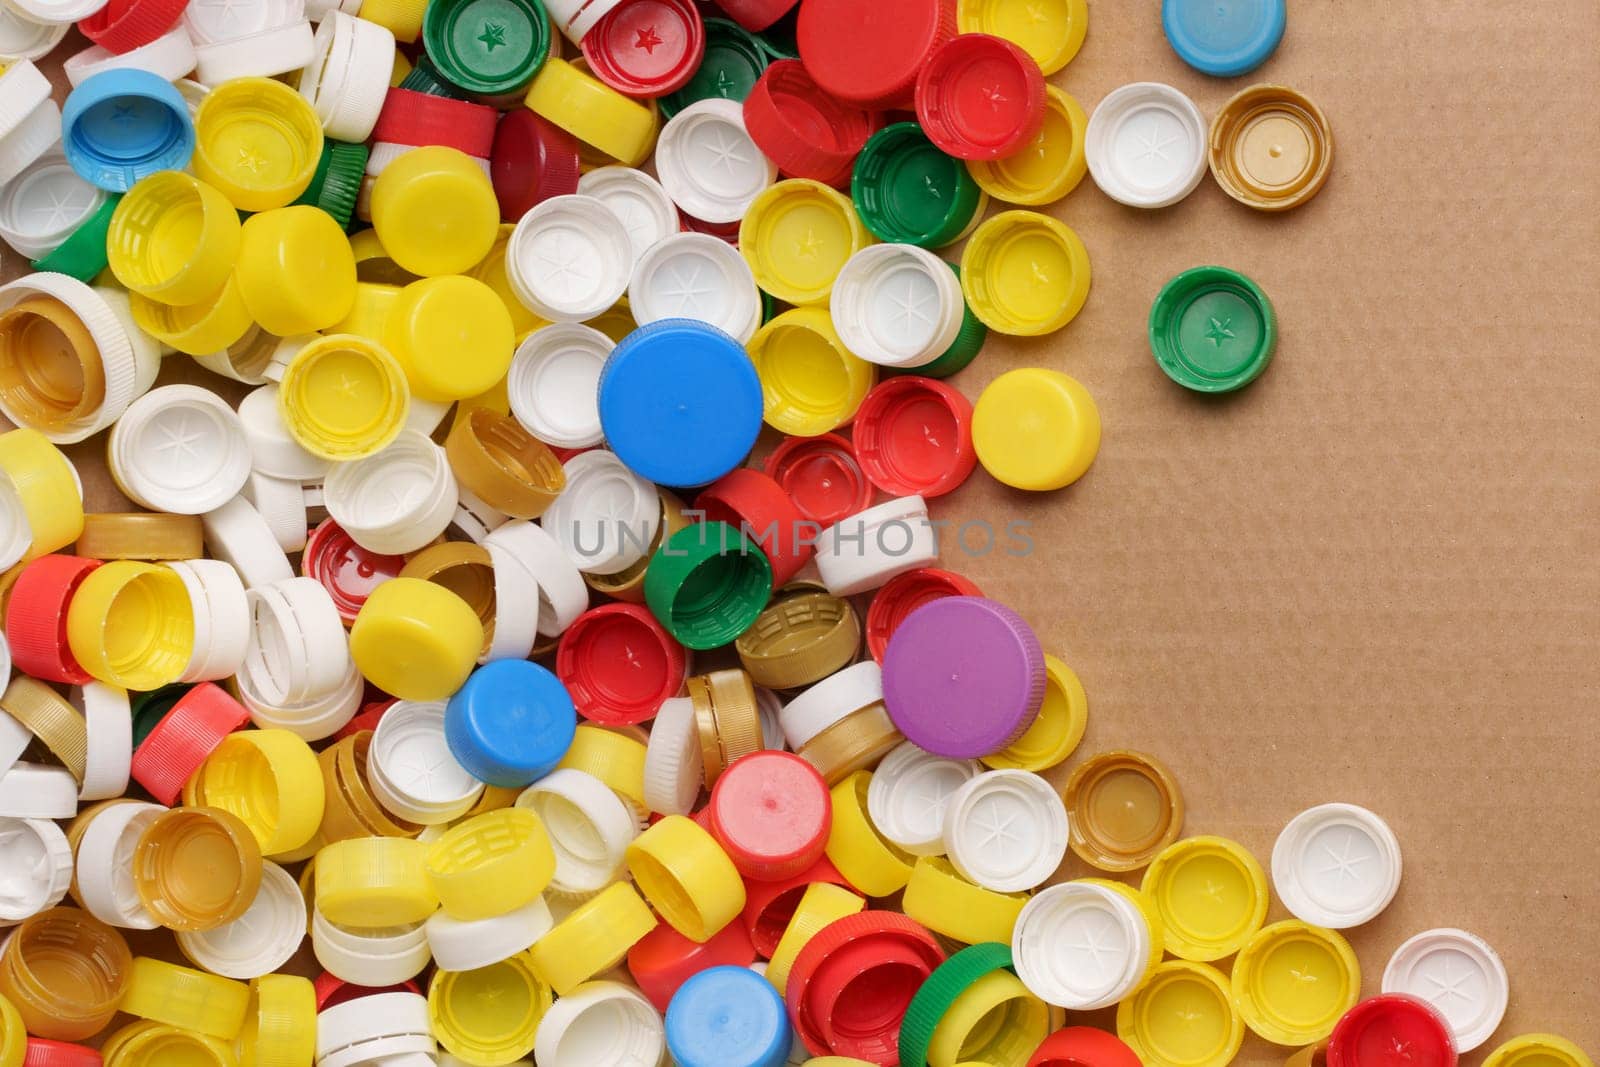 Used PET recycling plastic bottle cap plastic lids. Colorful bottle caps background cardboard box. Garbage PET waste recycling bottle cap sorting waste plastic garbage collection. Recyclable materials